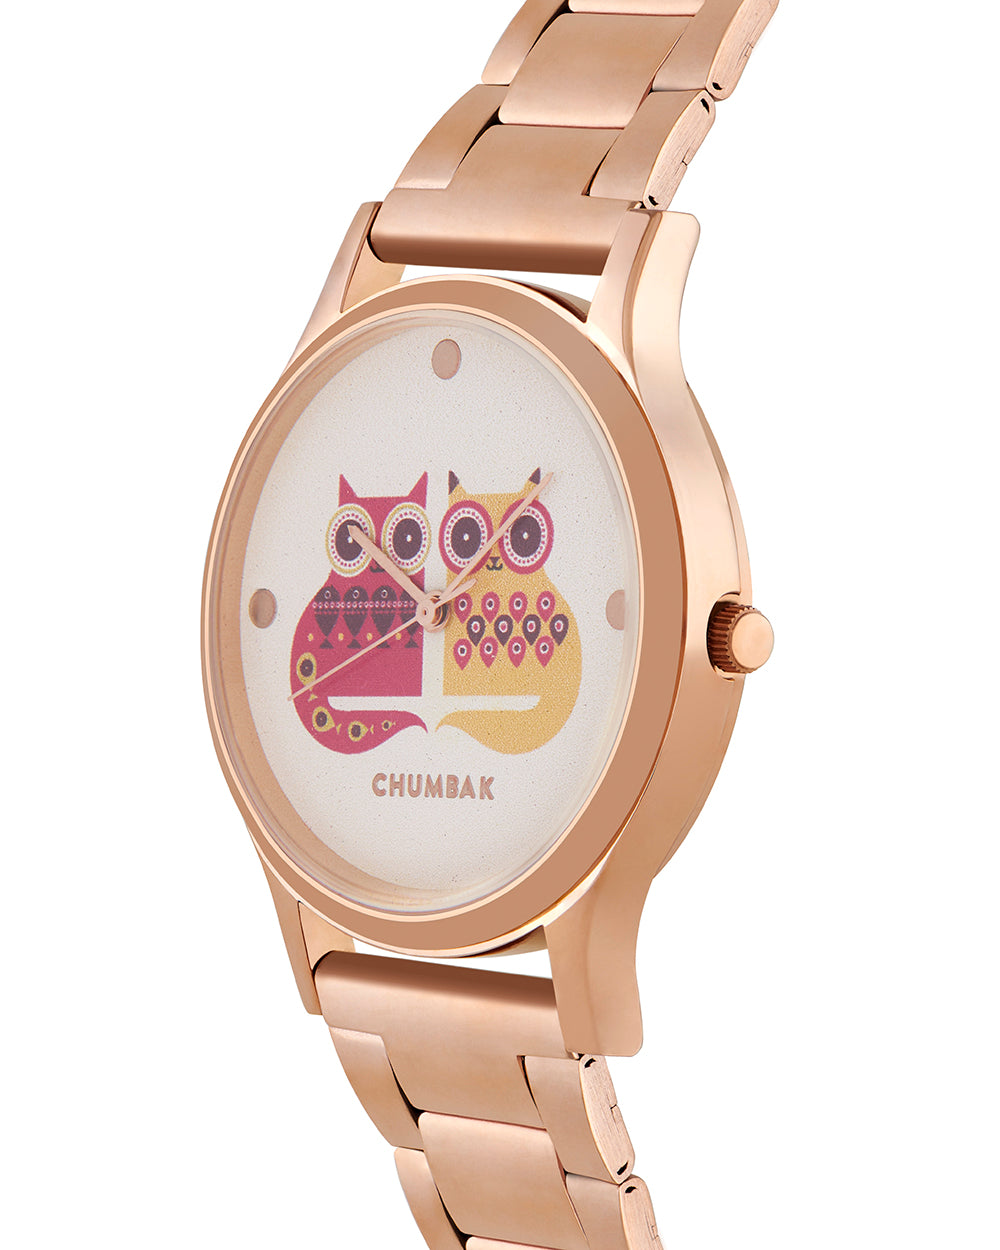 Teal by Chumbak Being Catty Watch,Stainless Steel Link Strap